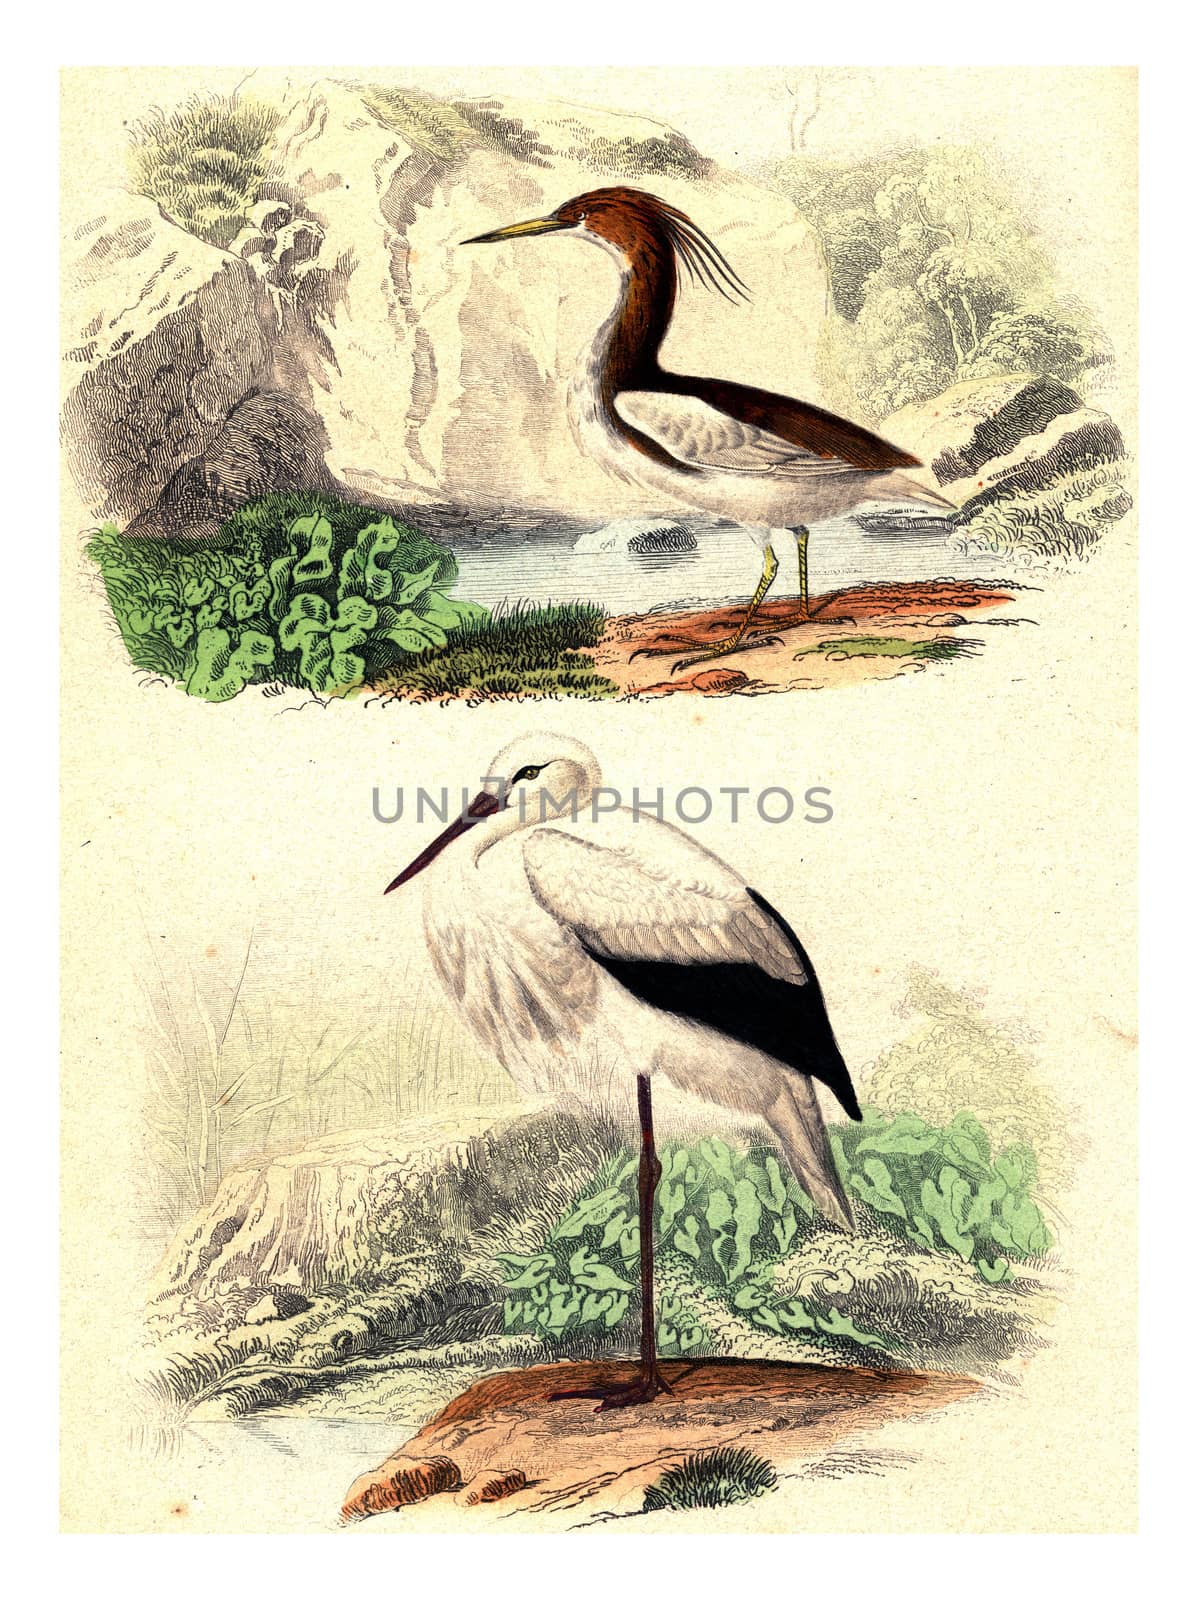 Crabier of mahon, The stork, vintage engraved illustration. From Buffon Complete Work.
